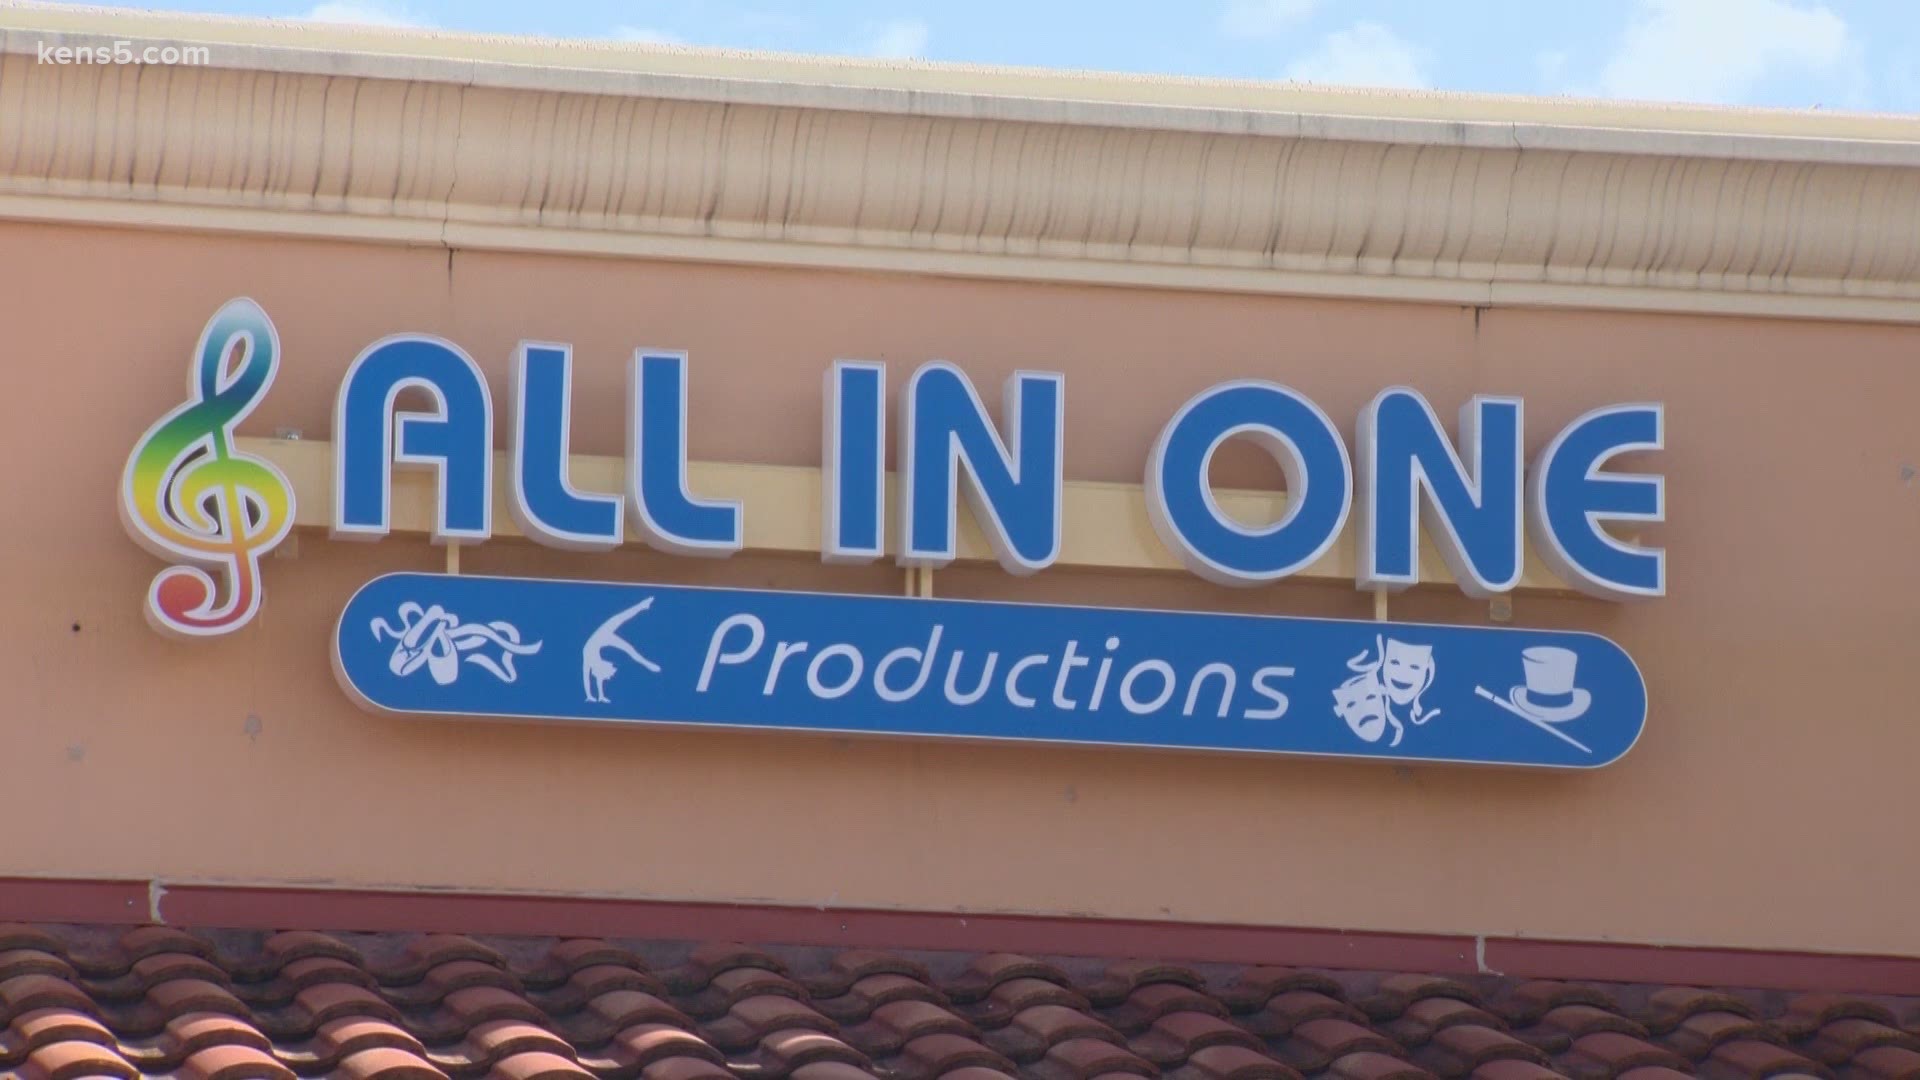 All In One Productions opened its doors in February and had to close early on due to the virus.